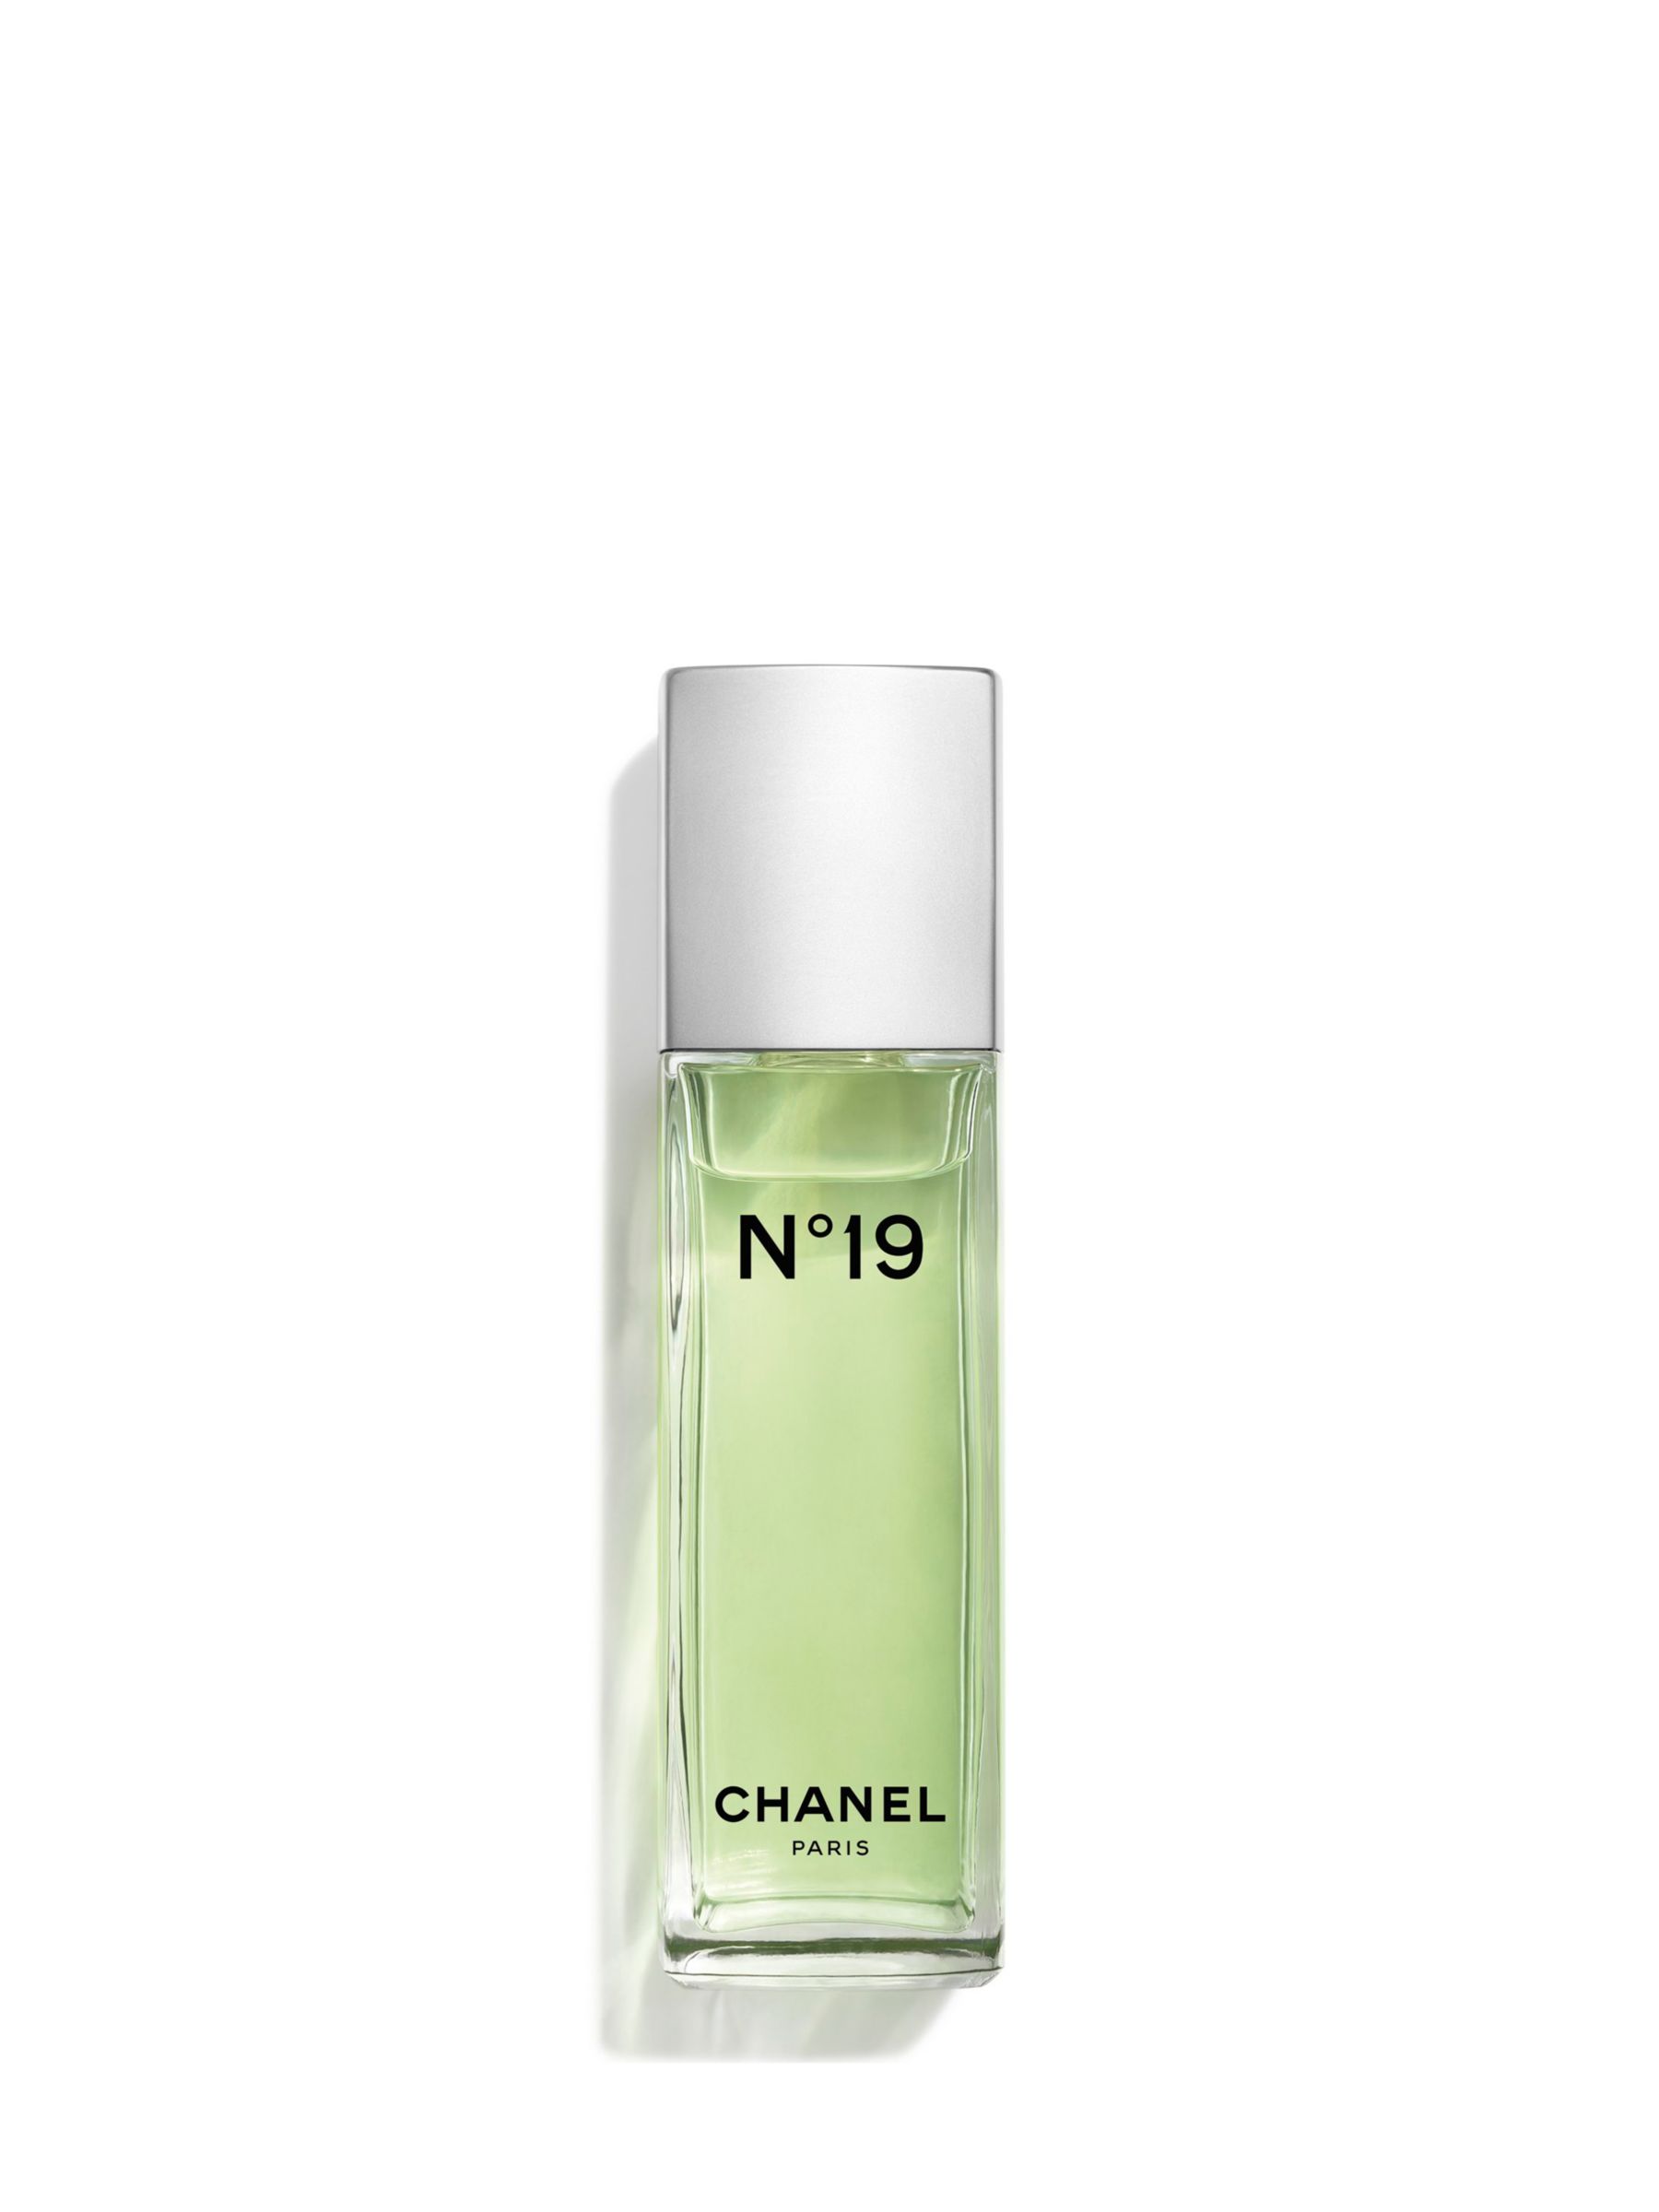 Chanel No. 19 Fitting For A Man?